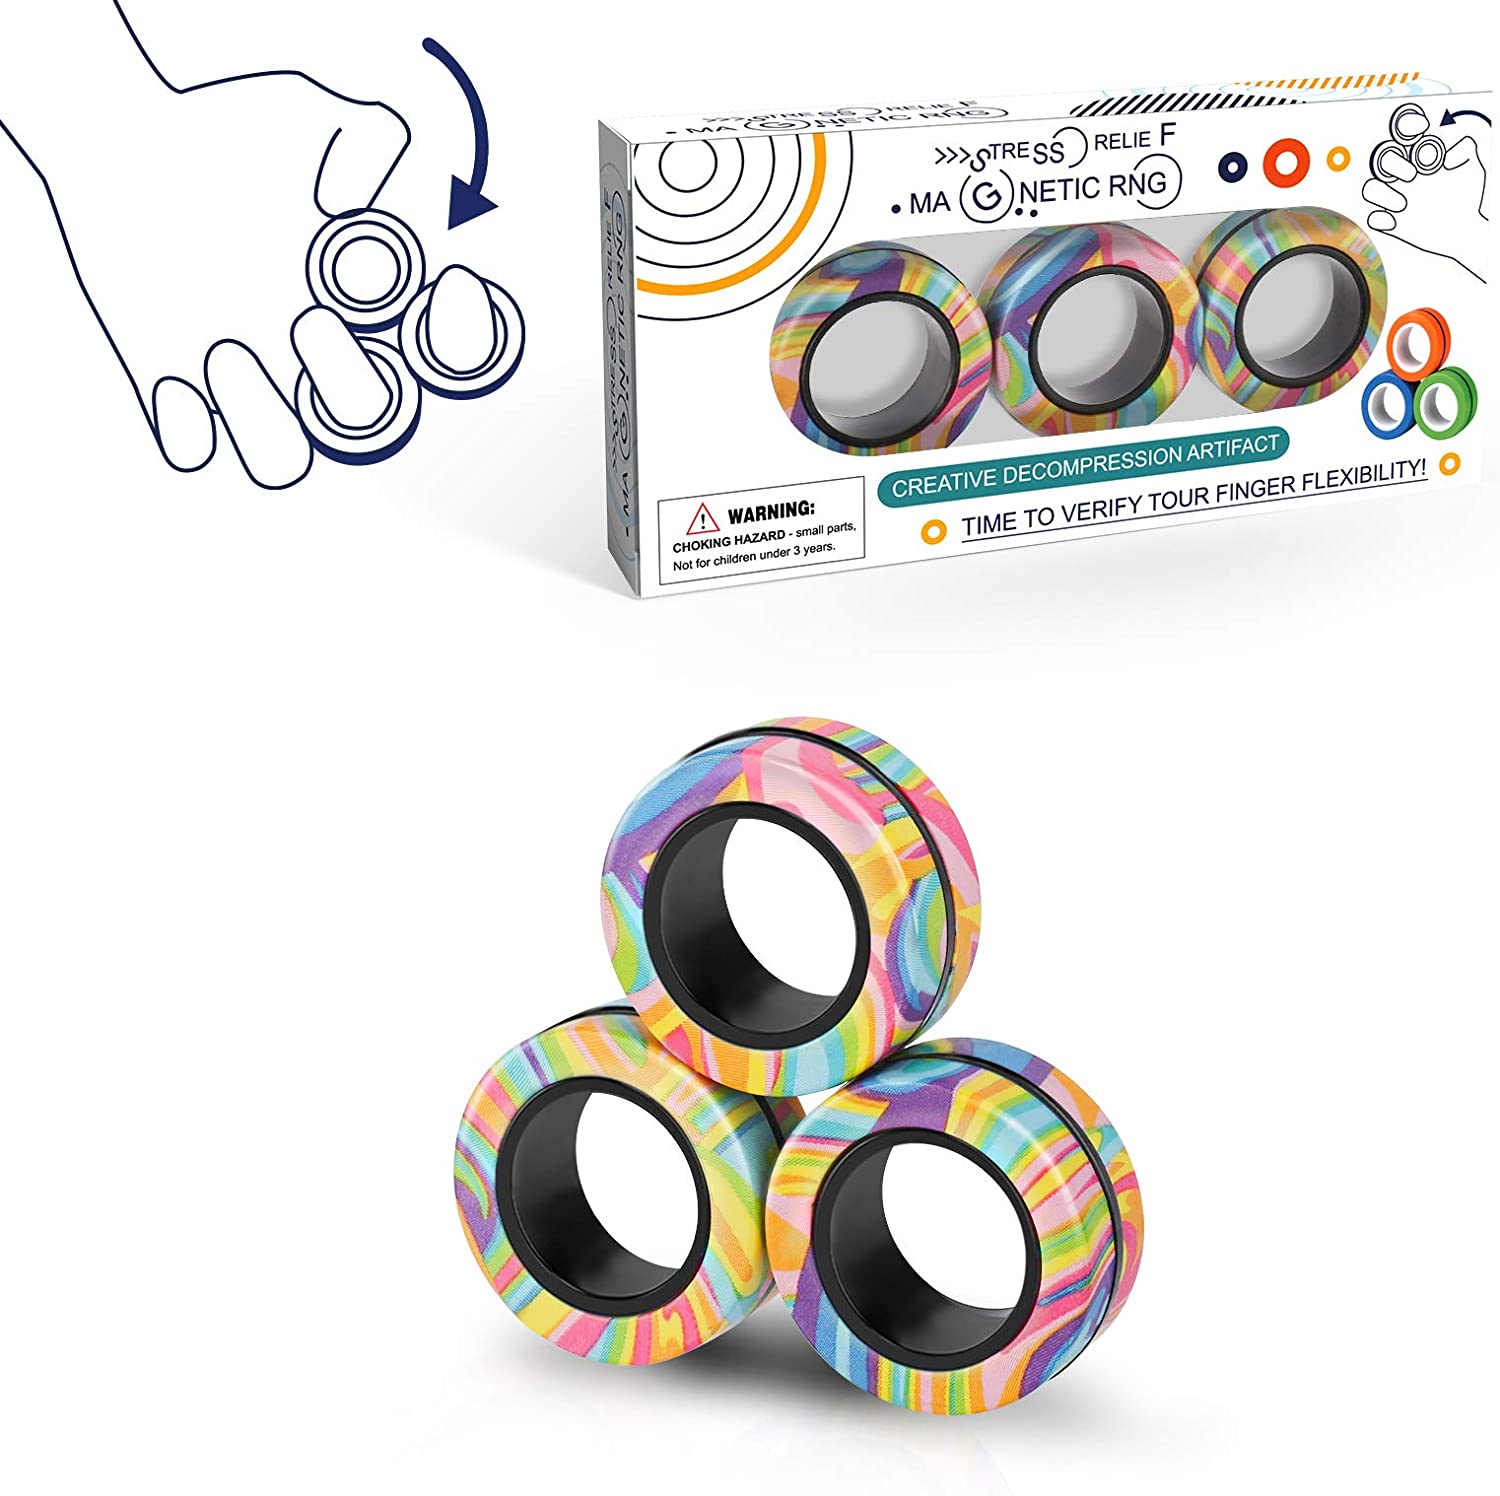 7 cool fidget toys that aren't spinners: Magnetic ring fidget toy | Amazon